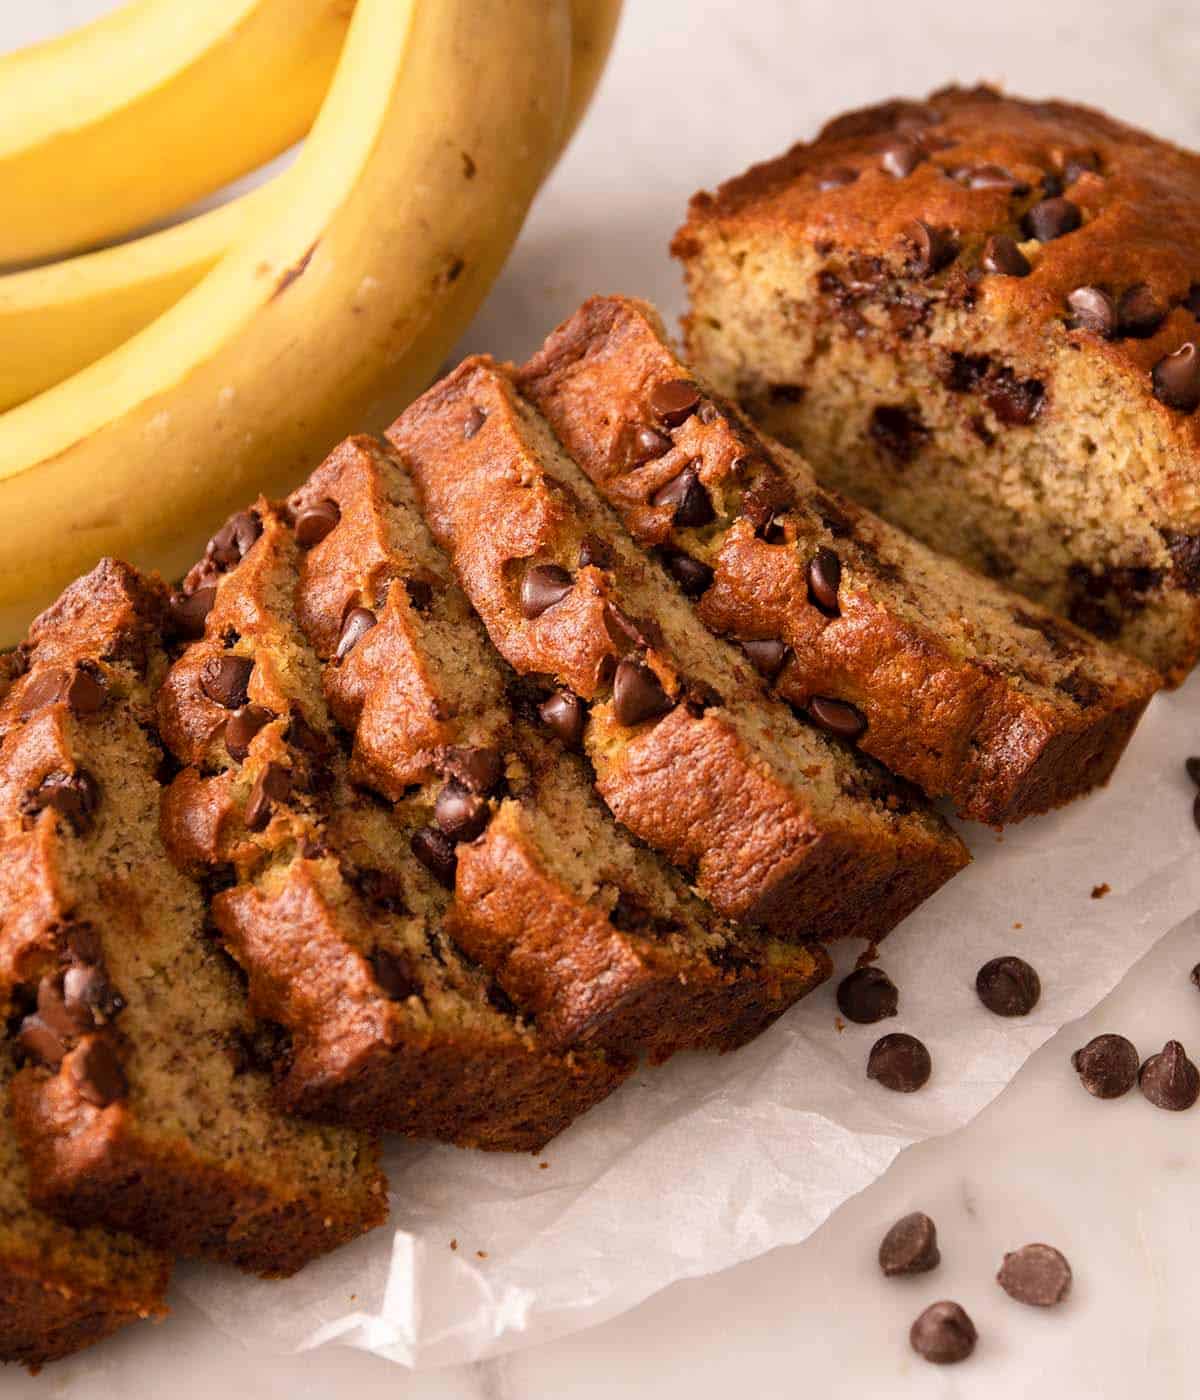 Chocolate chip banana bread cut into slices